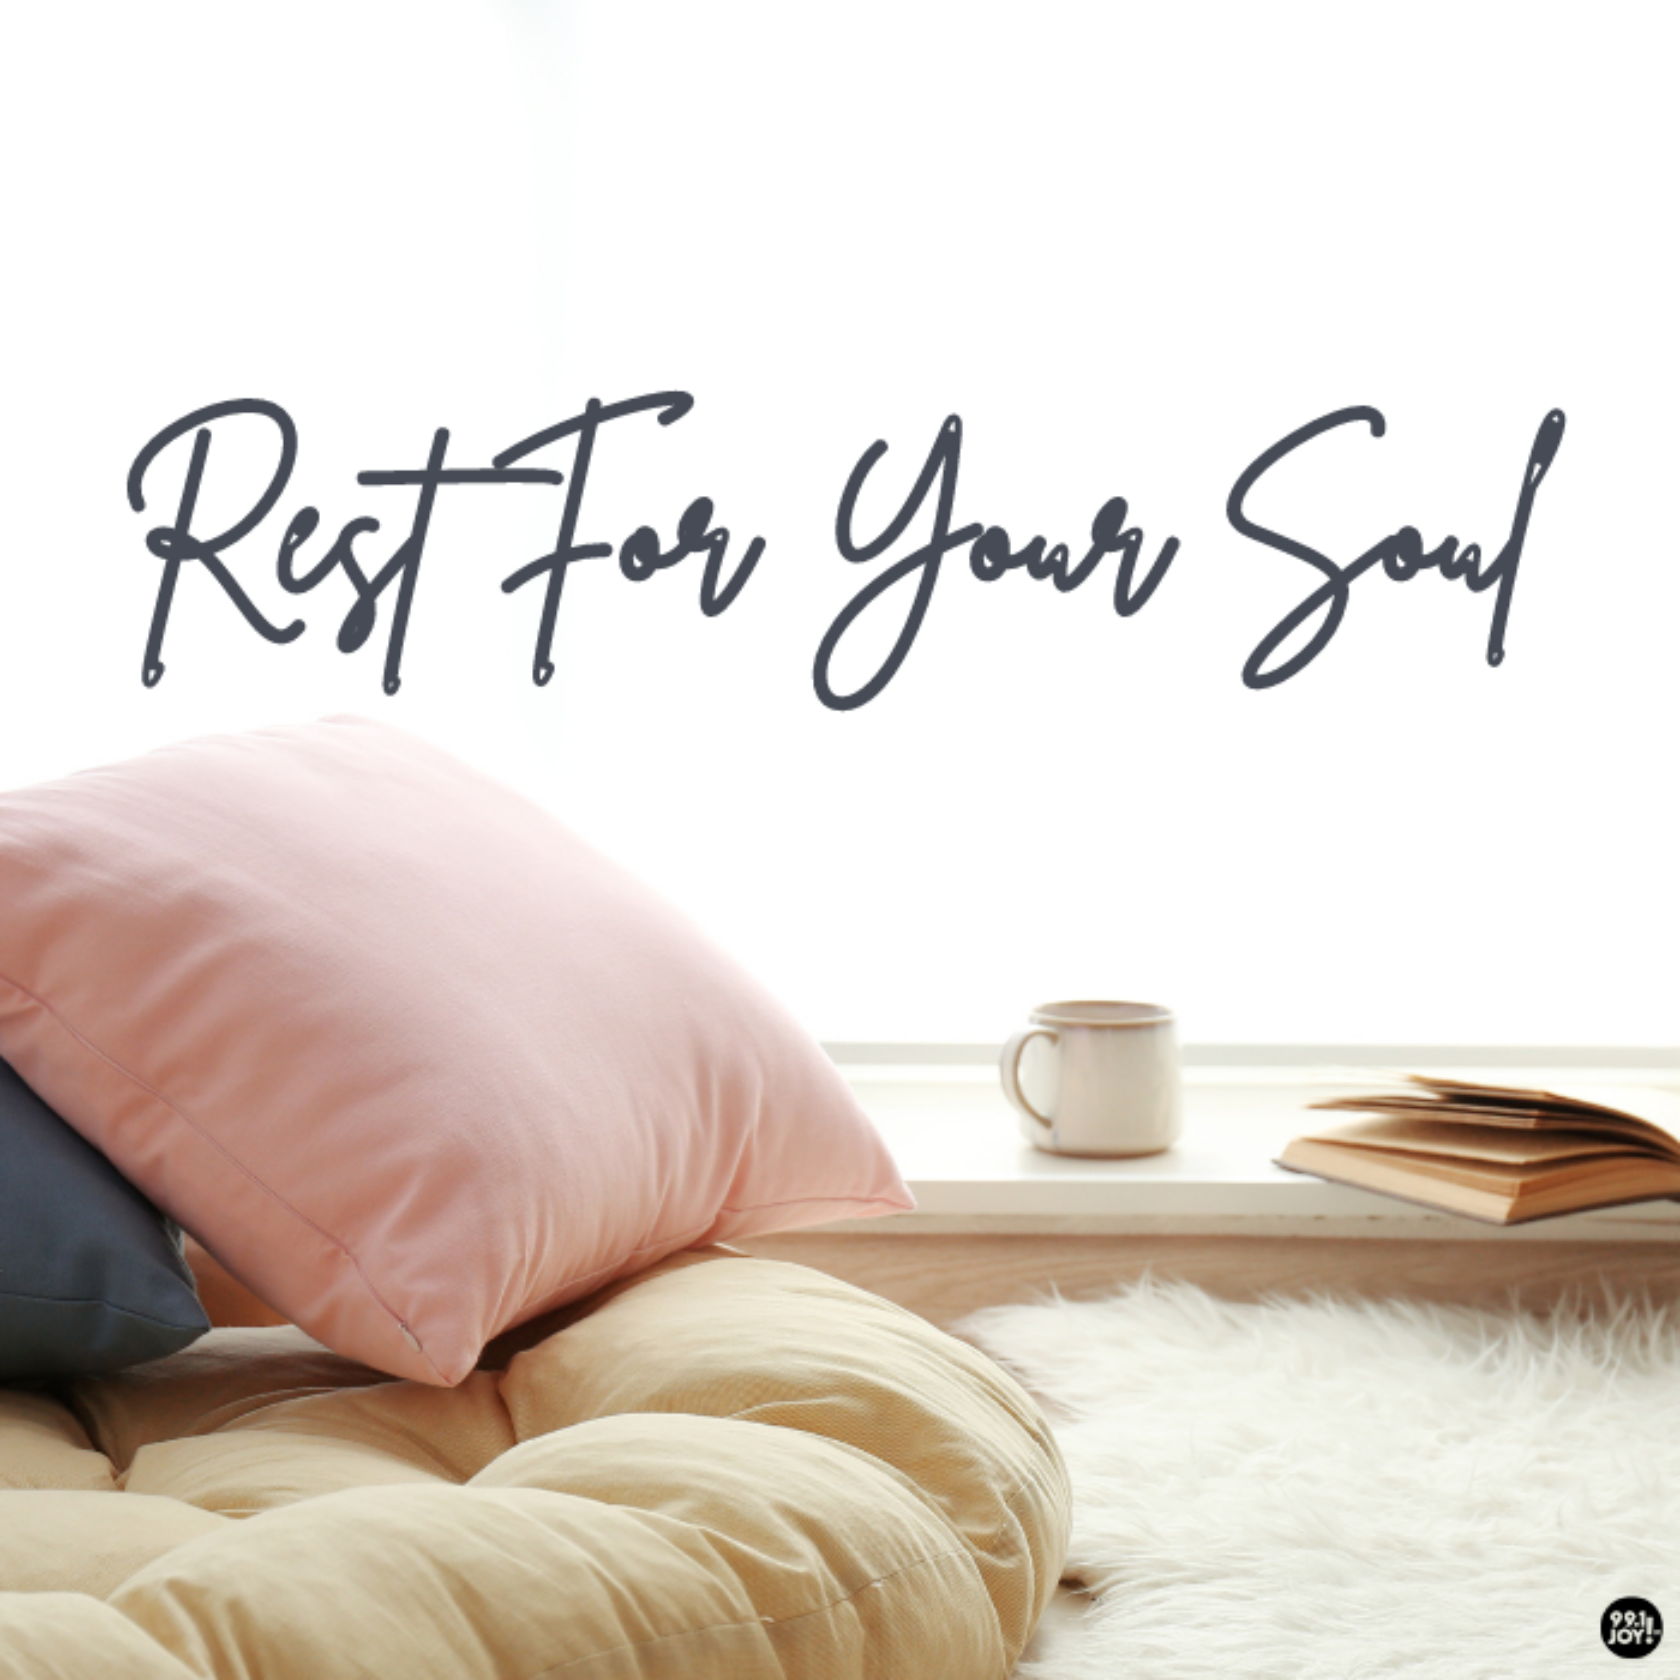 Rest For Your Soul 